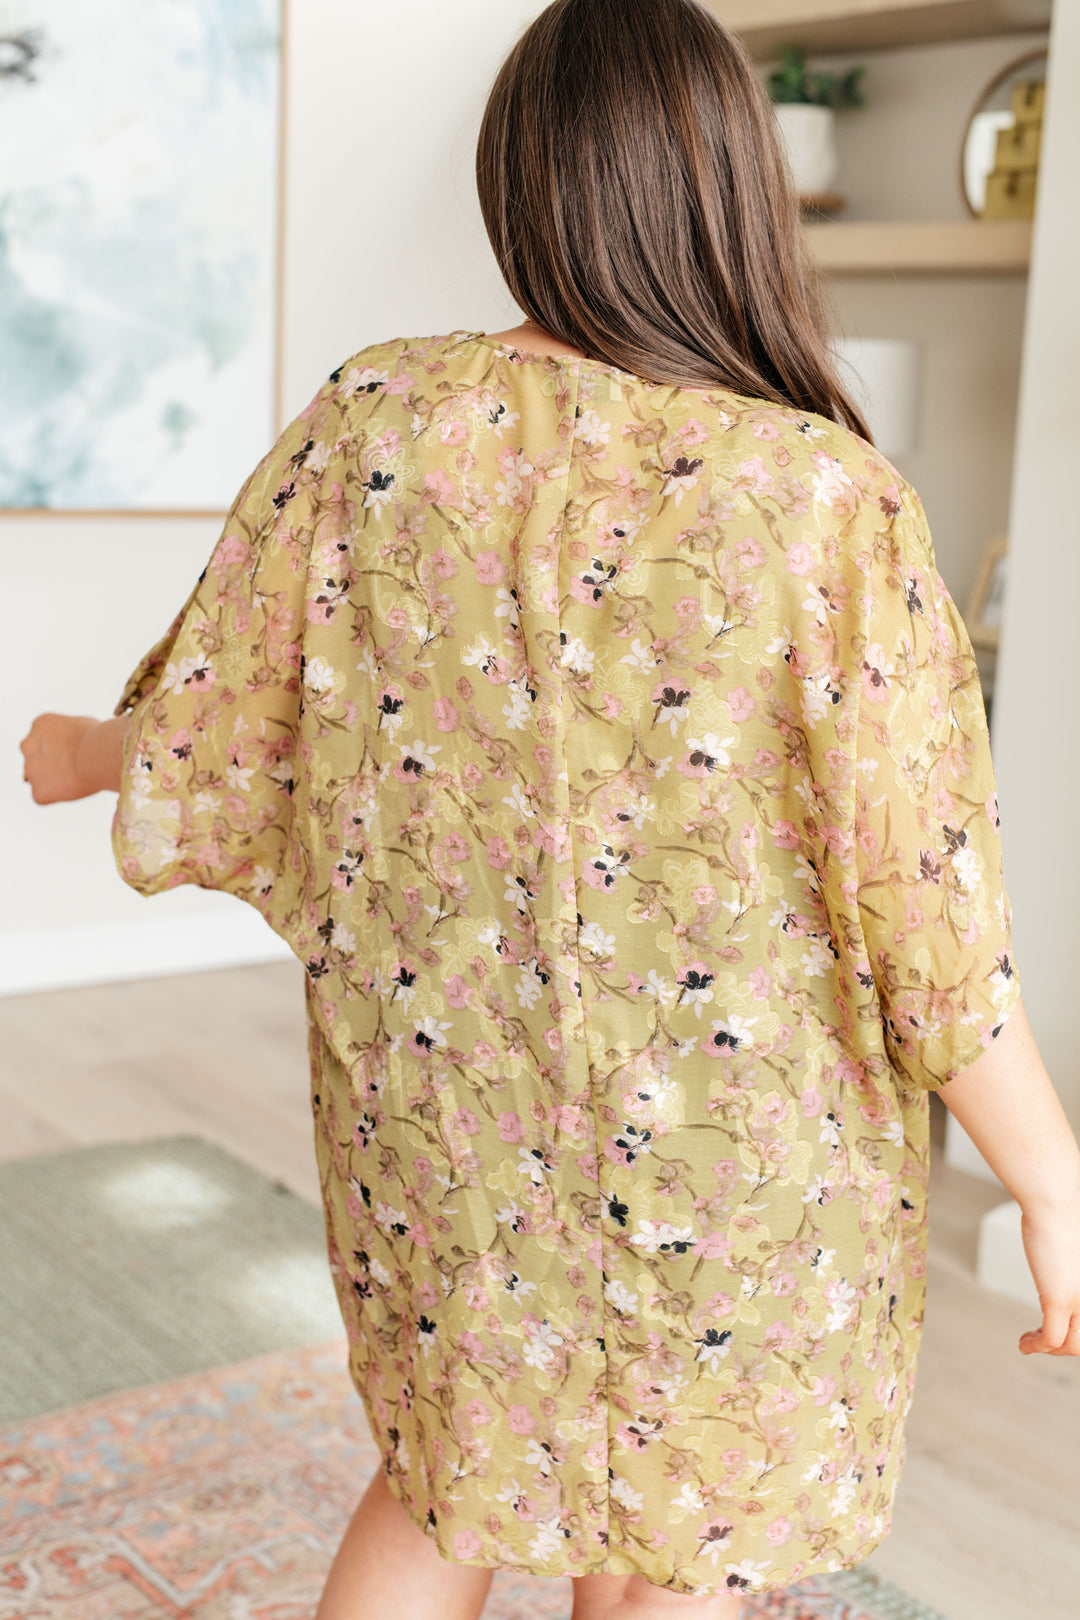 Go Anywhere Floral Kimono-Cardigans + Kimonos-Inspired by Justeen-Women's Clothing Boutique in Chicago, Illinois